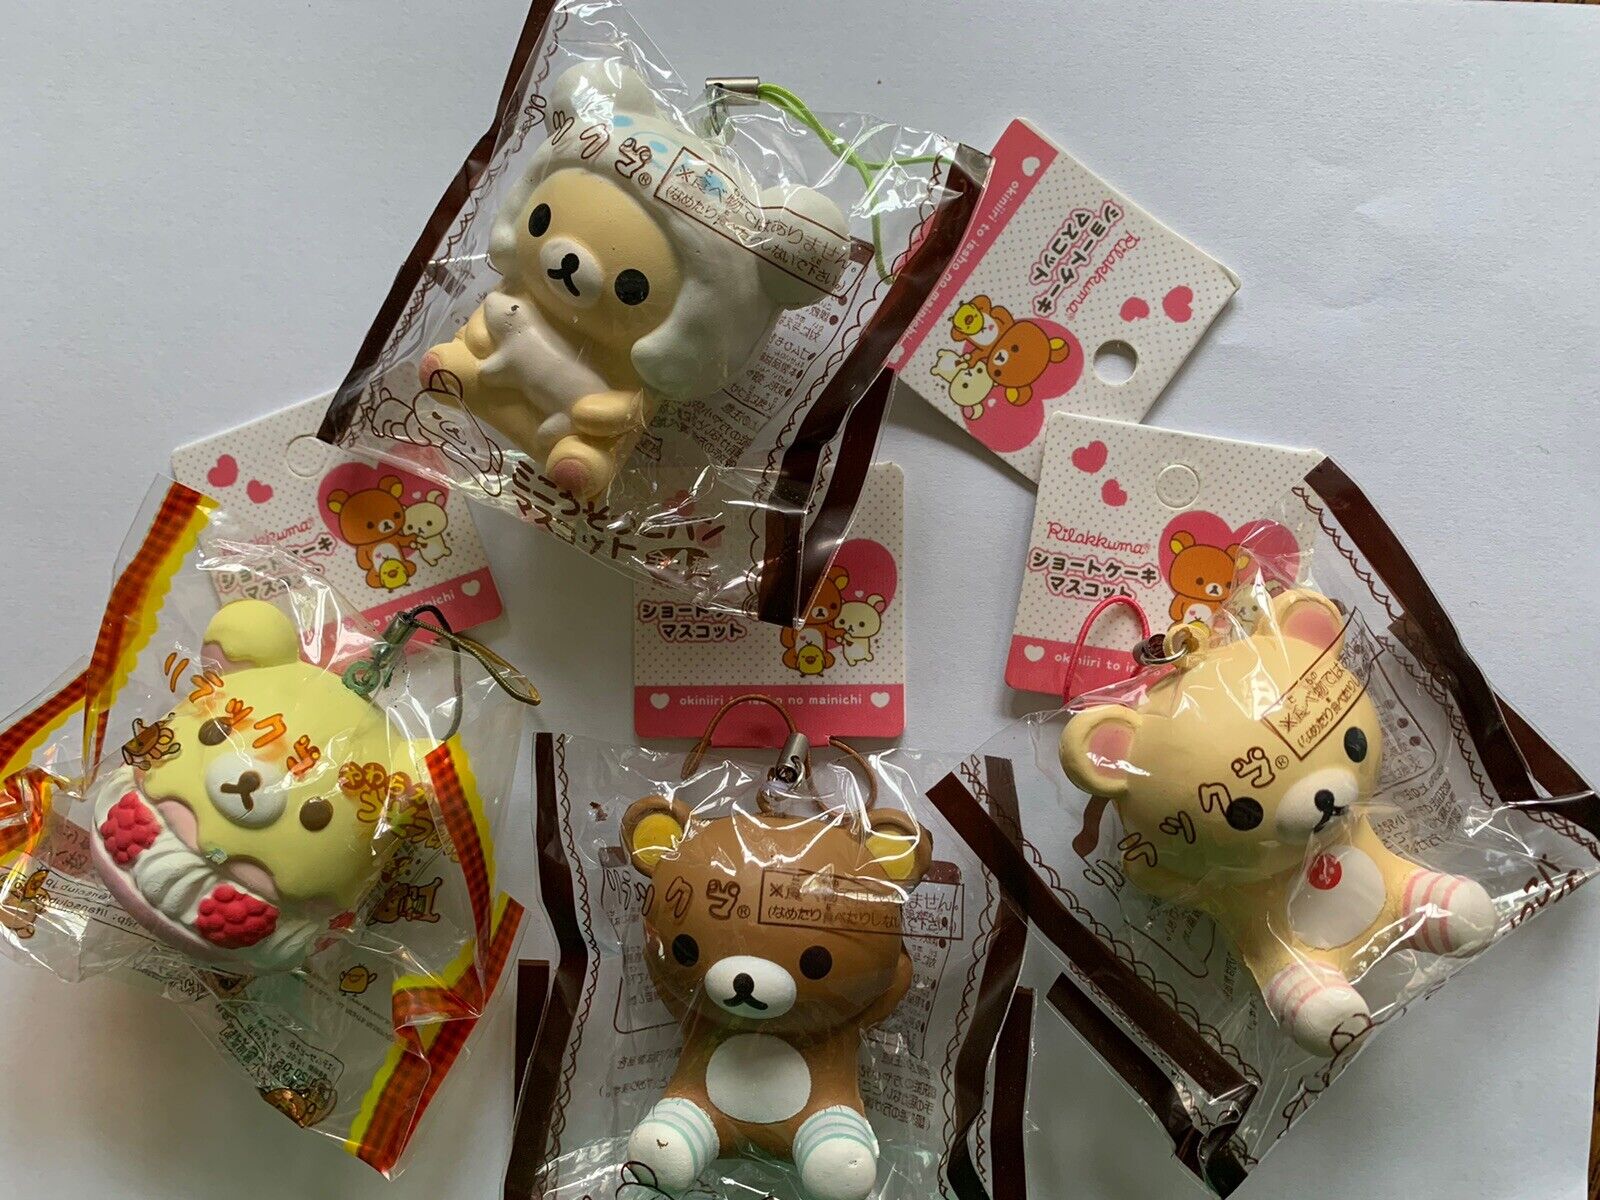 Set of 4 Rilakkuma Squishy Keychain - Lot - NEW in package with Japanese tags